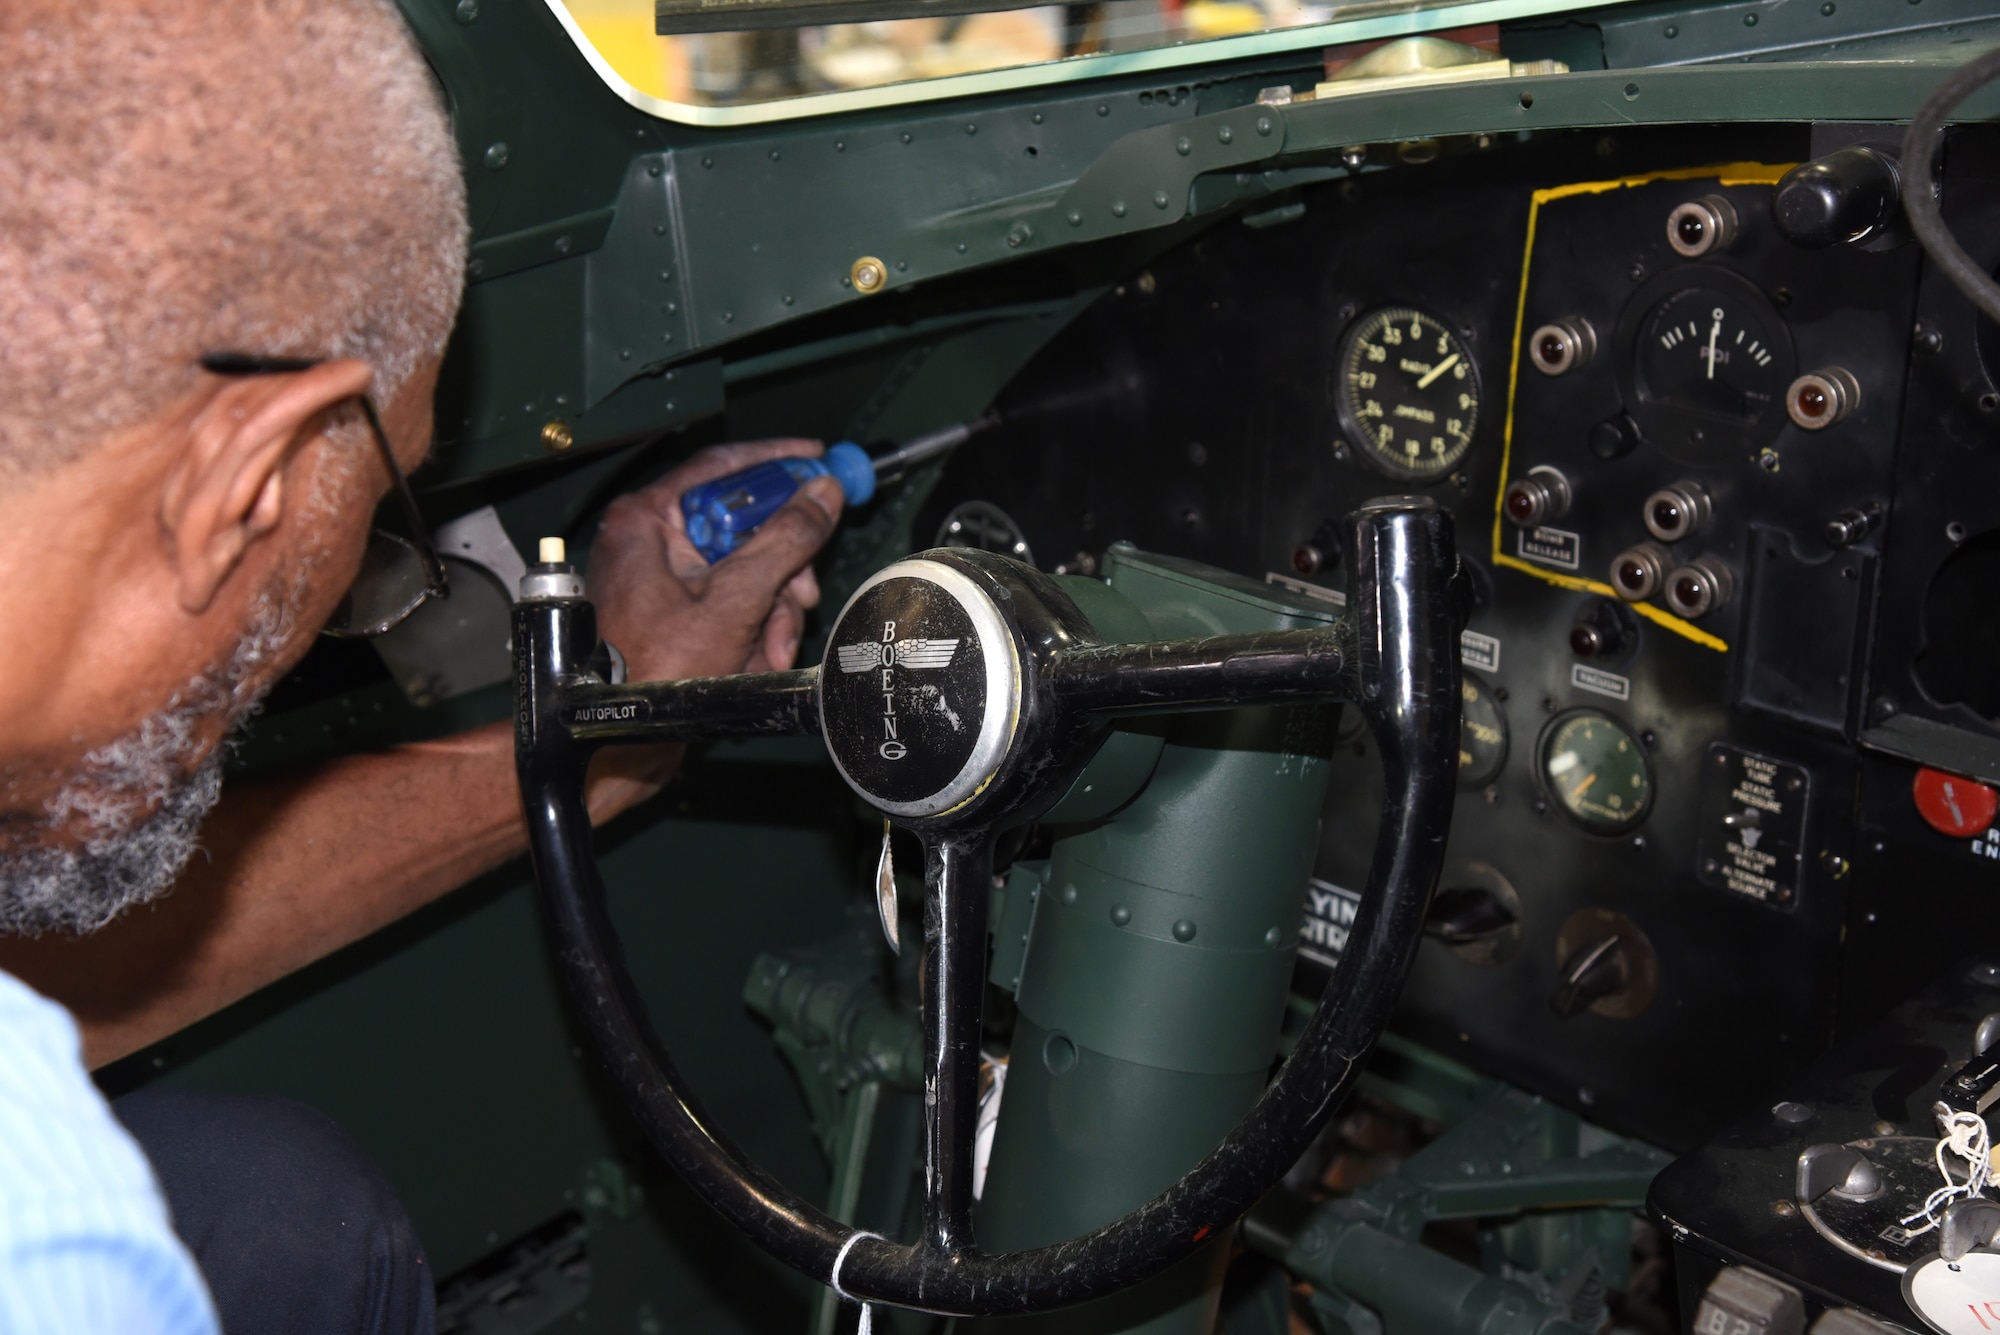 DAYTON, Ohio -- National Museum of the U.S. Air Force restoration specialist Dave Robb installs the pilot's instrument panel on the Boeing B-17F Memphis Belle on March 7, 2018. (U.S. Air Force photo by Ken LaRock)